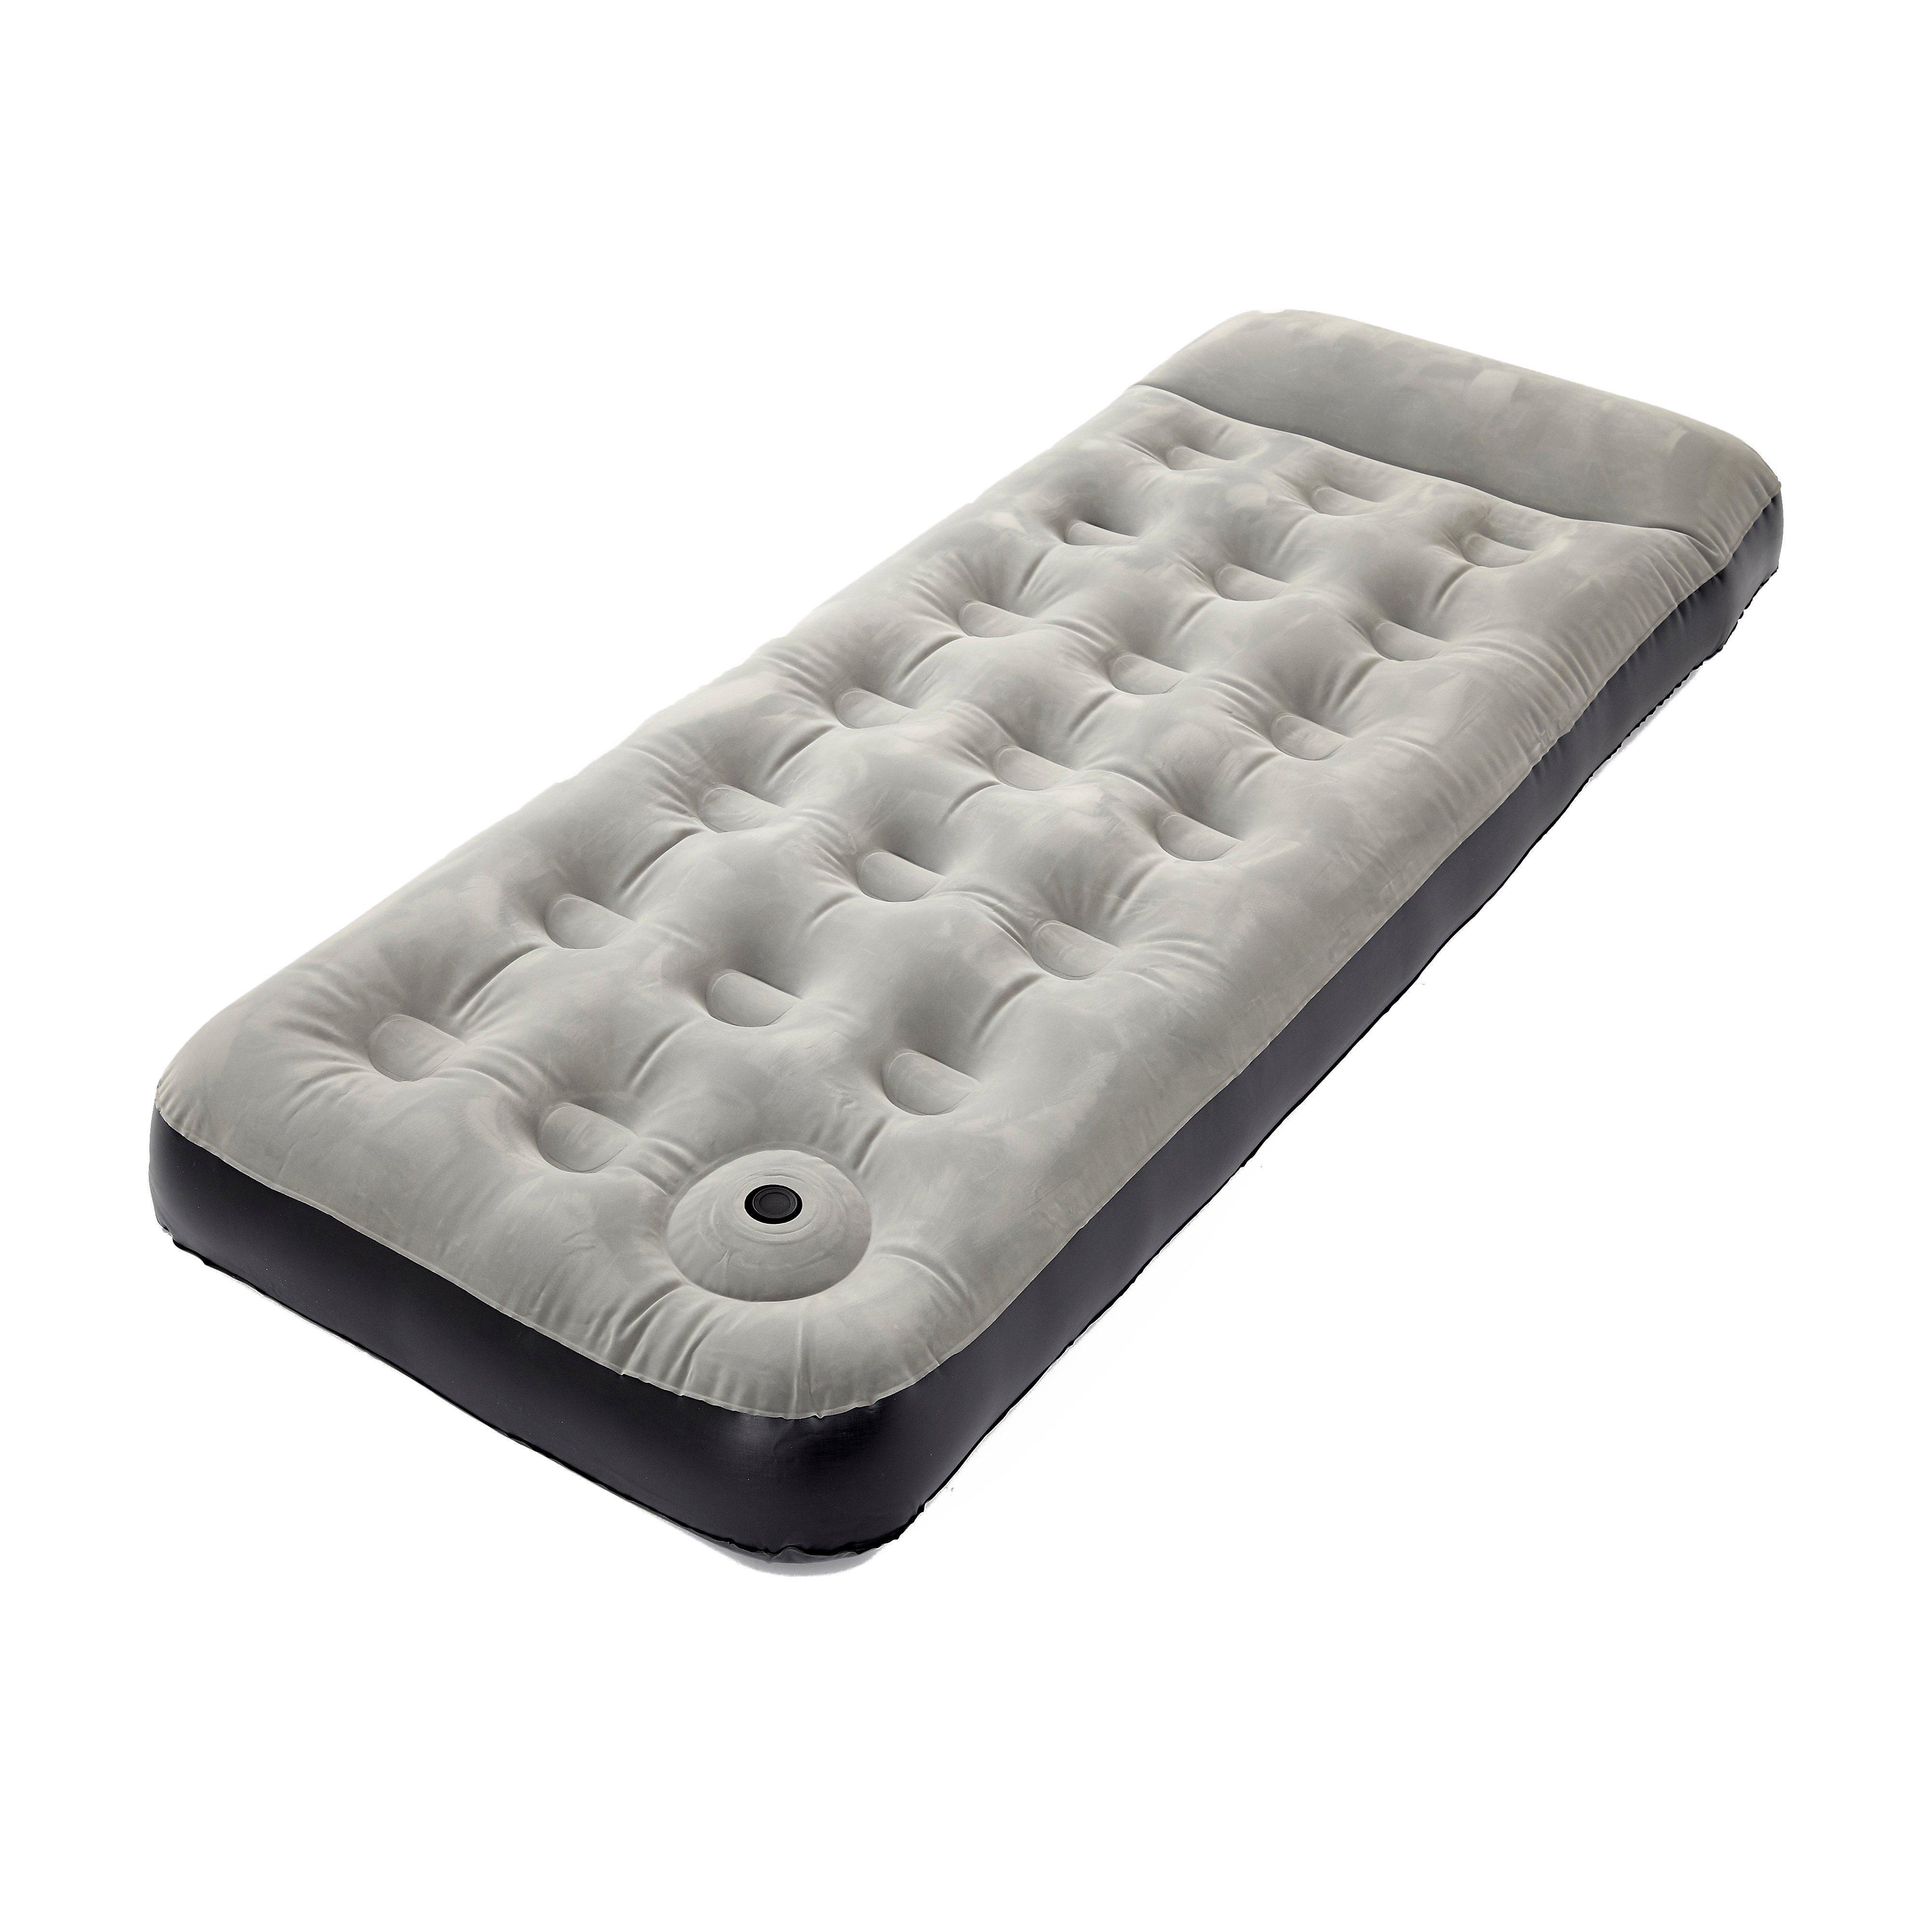 Hi-Gear Deluxe Single Airbed with Pump Review